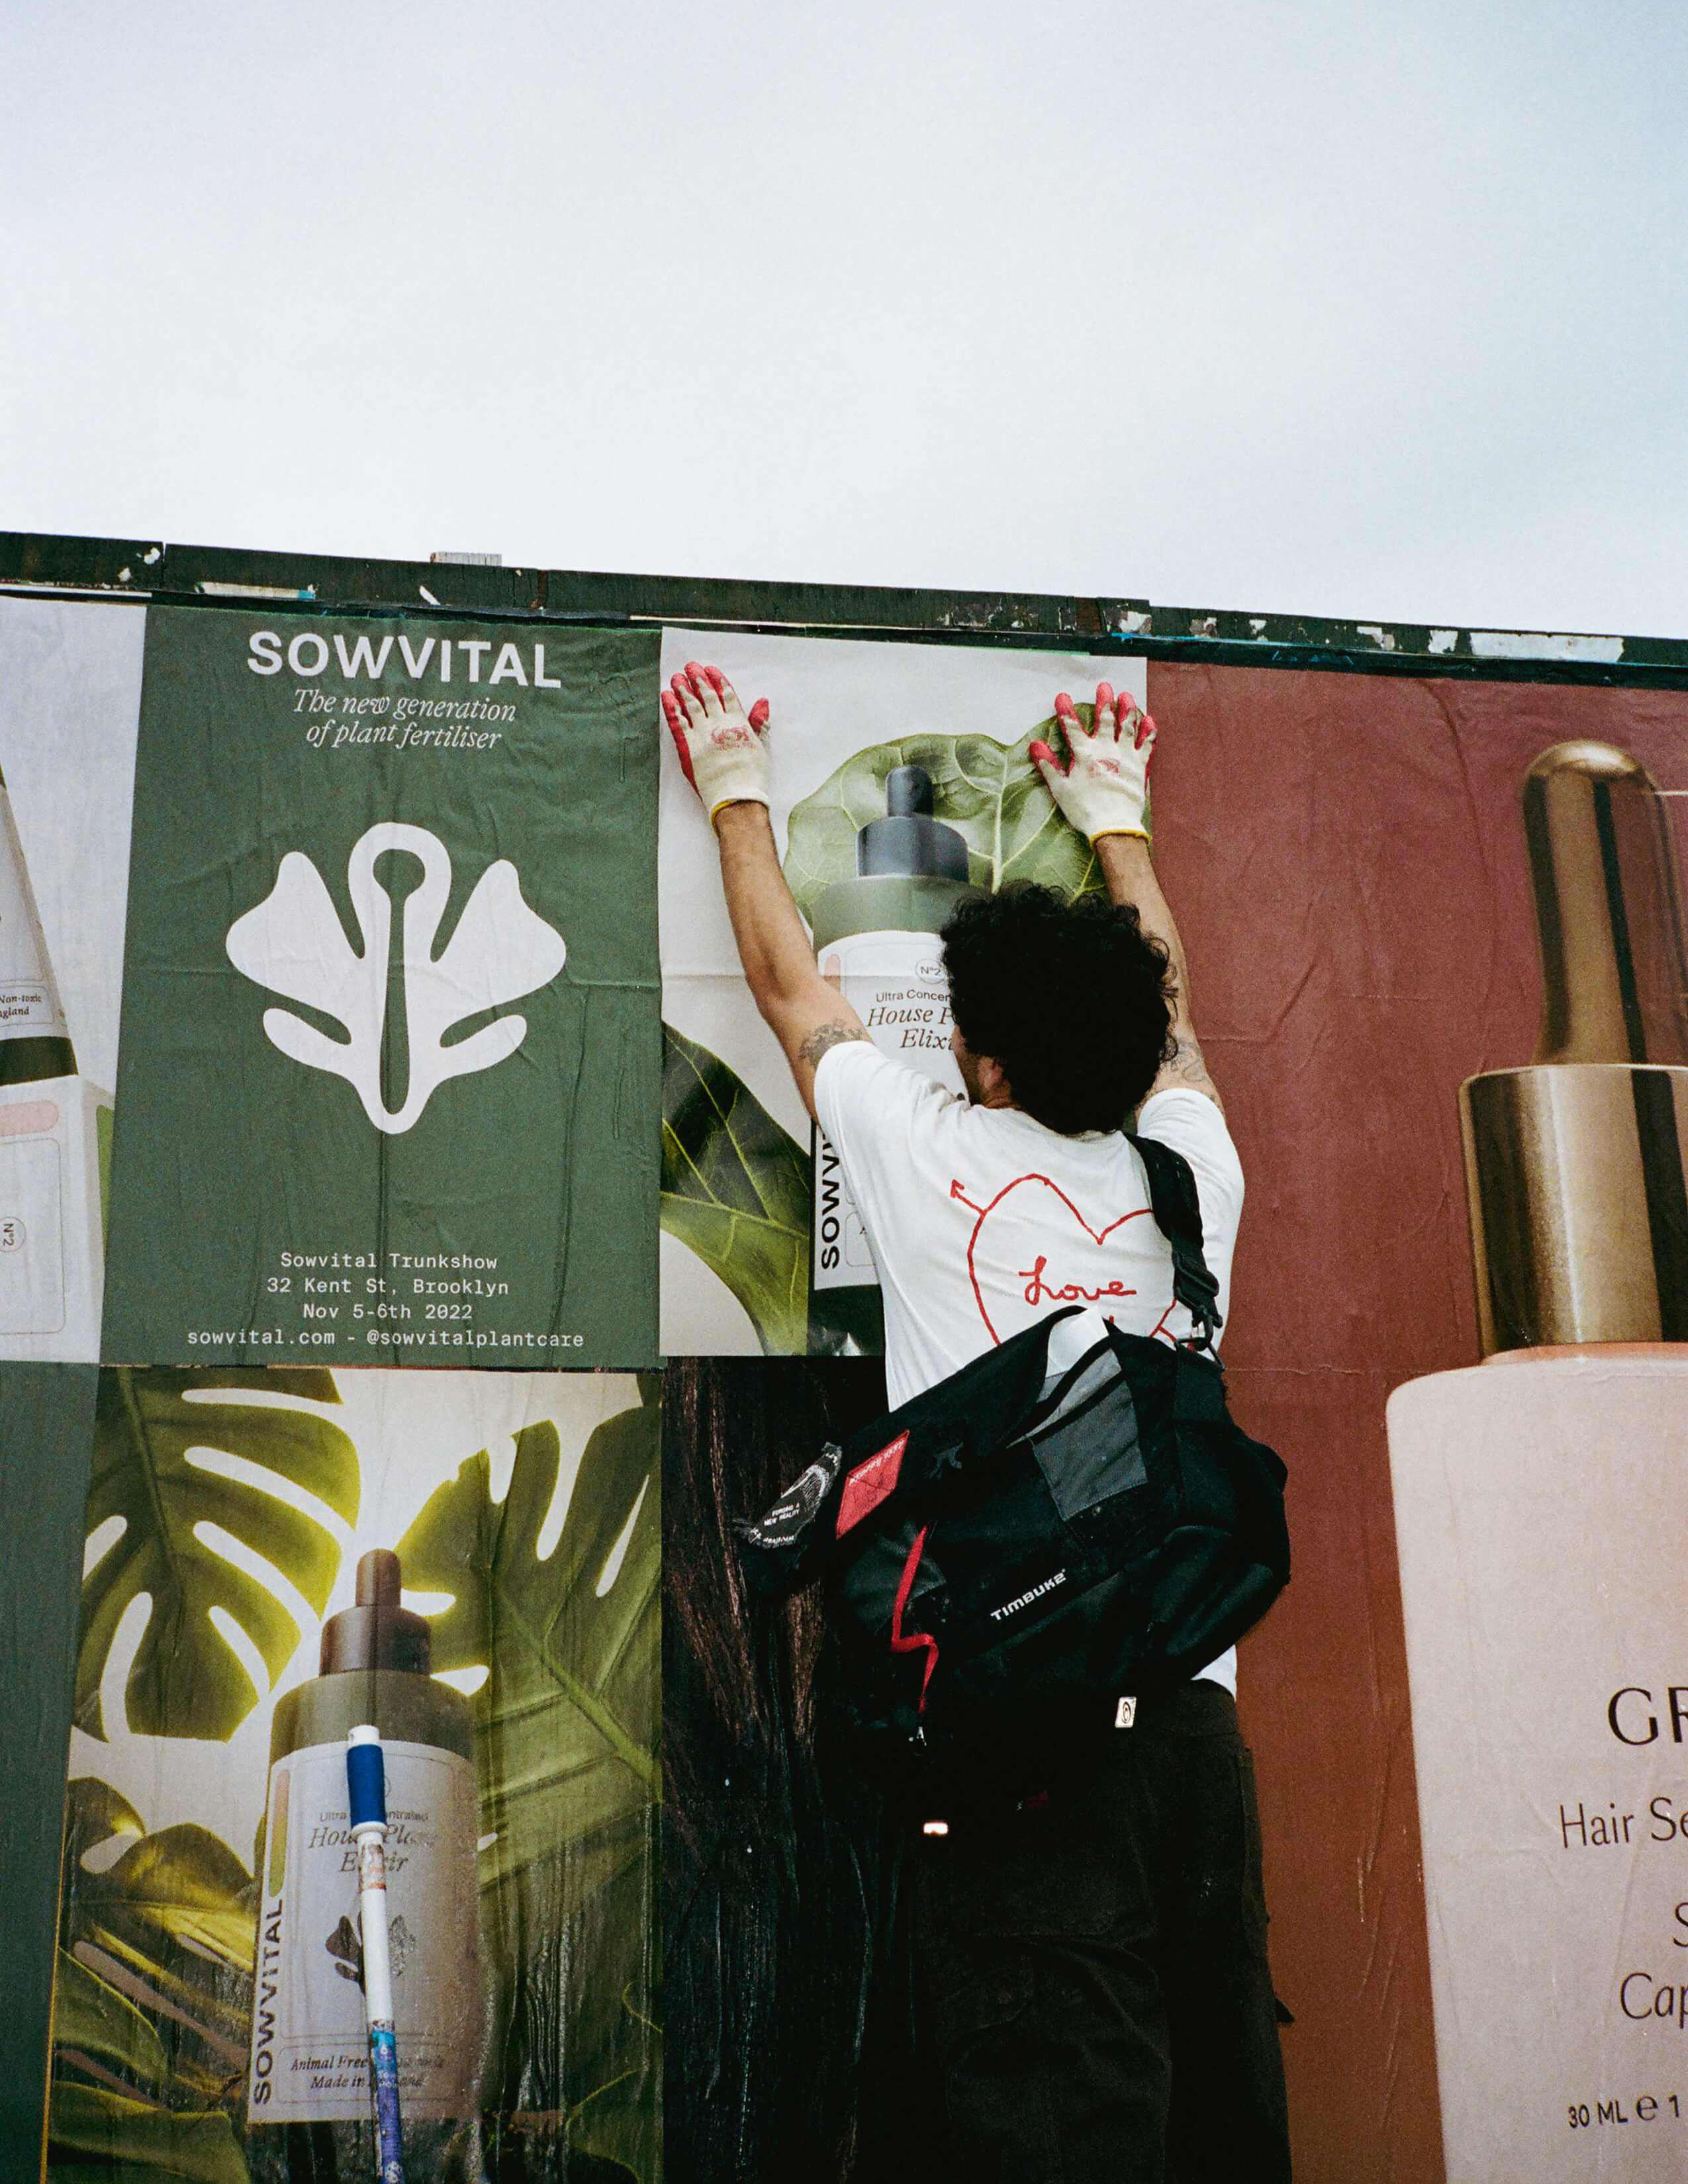 A person with gloves on was working on sticking the Sowvital posters on the board.